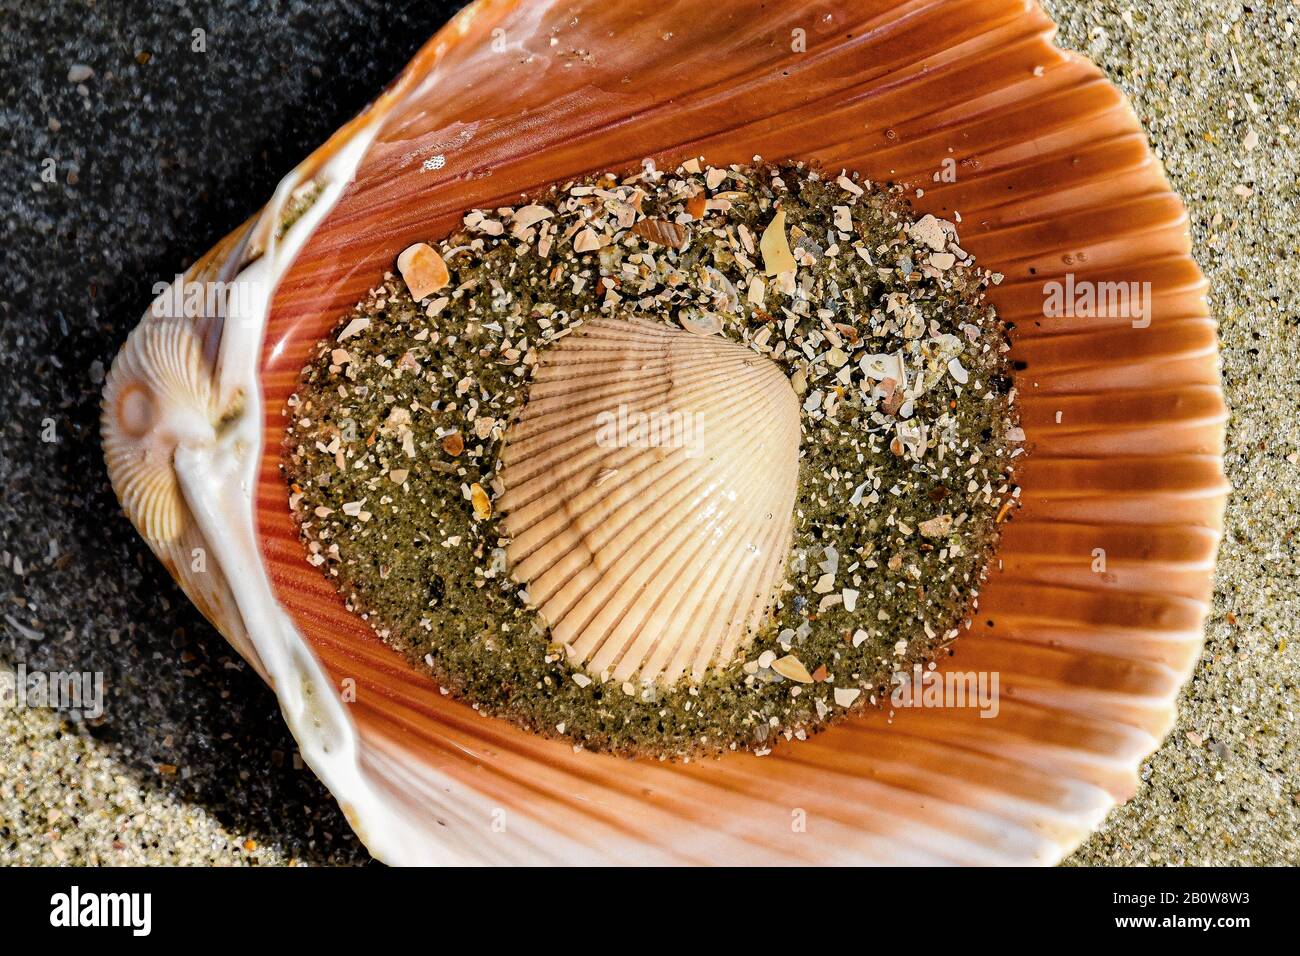 A sea shell cradles a smaller shell resting on some sand. The shells washed up looking that way and were found at low tide. Stock Photo